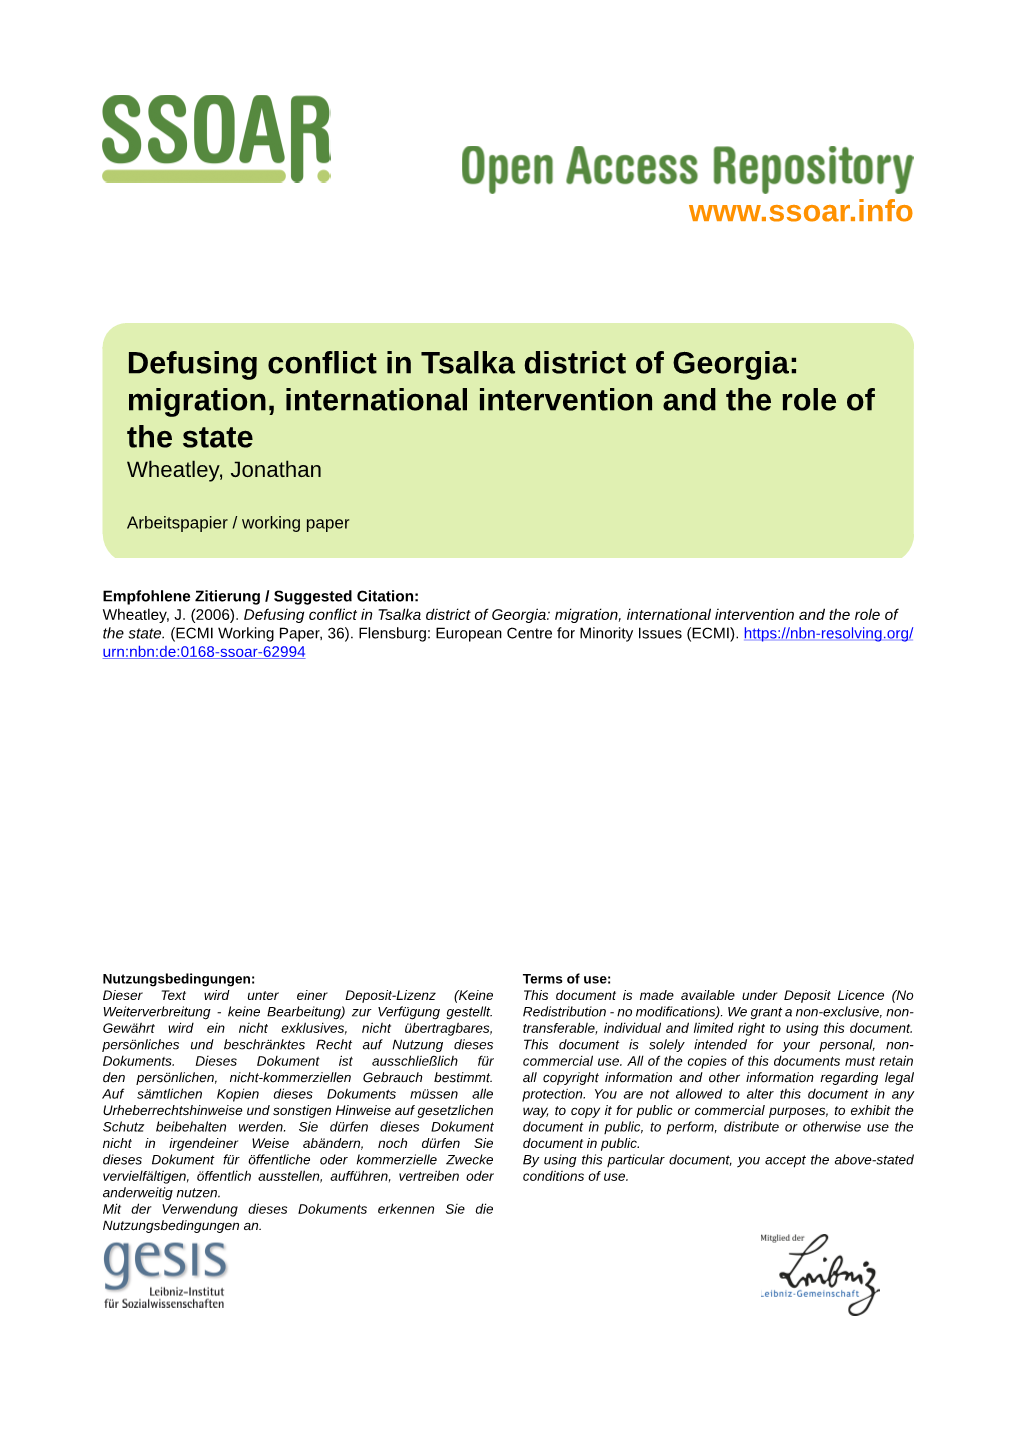 Defusing Conflict in Tsalka District of Georgia: Migration, International Intervention and the Role of the State Wheatley, Jonathan